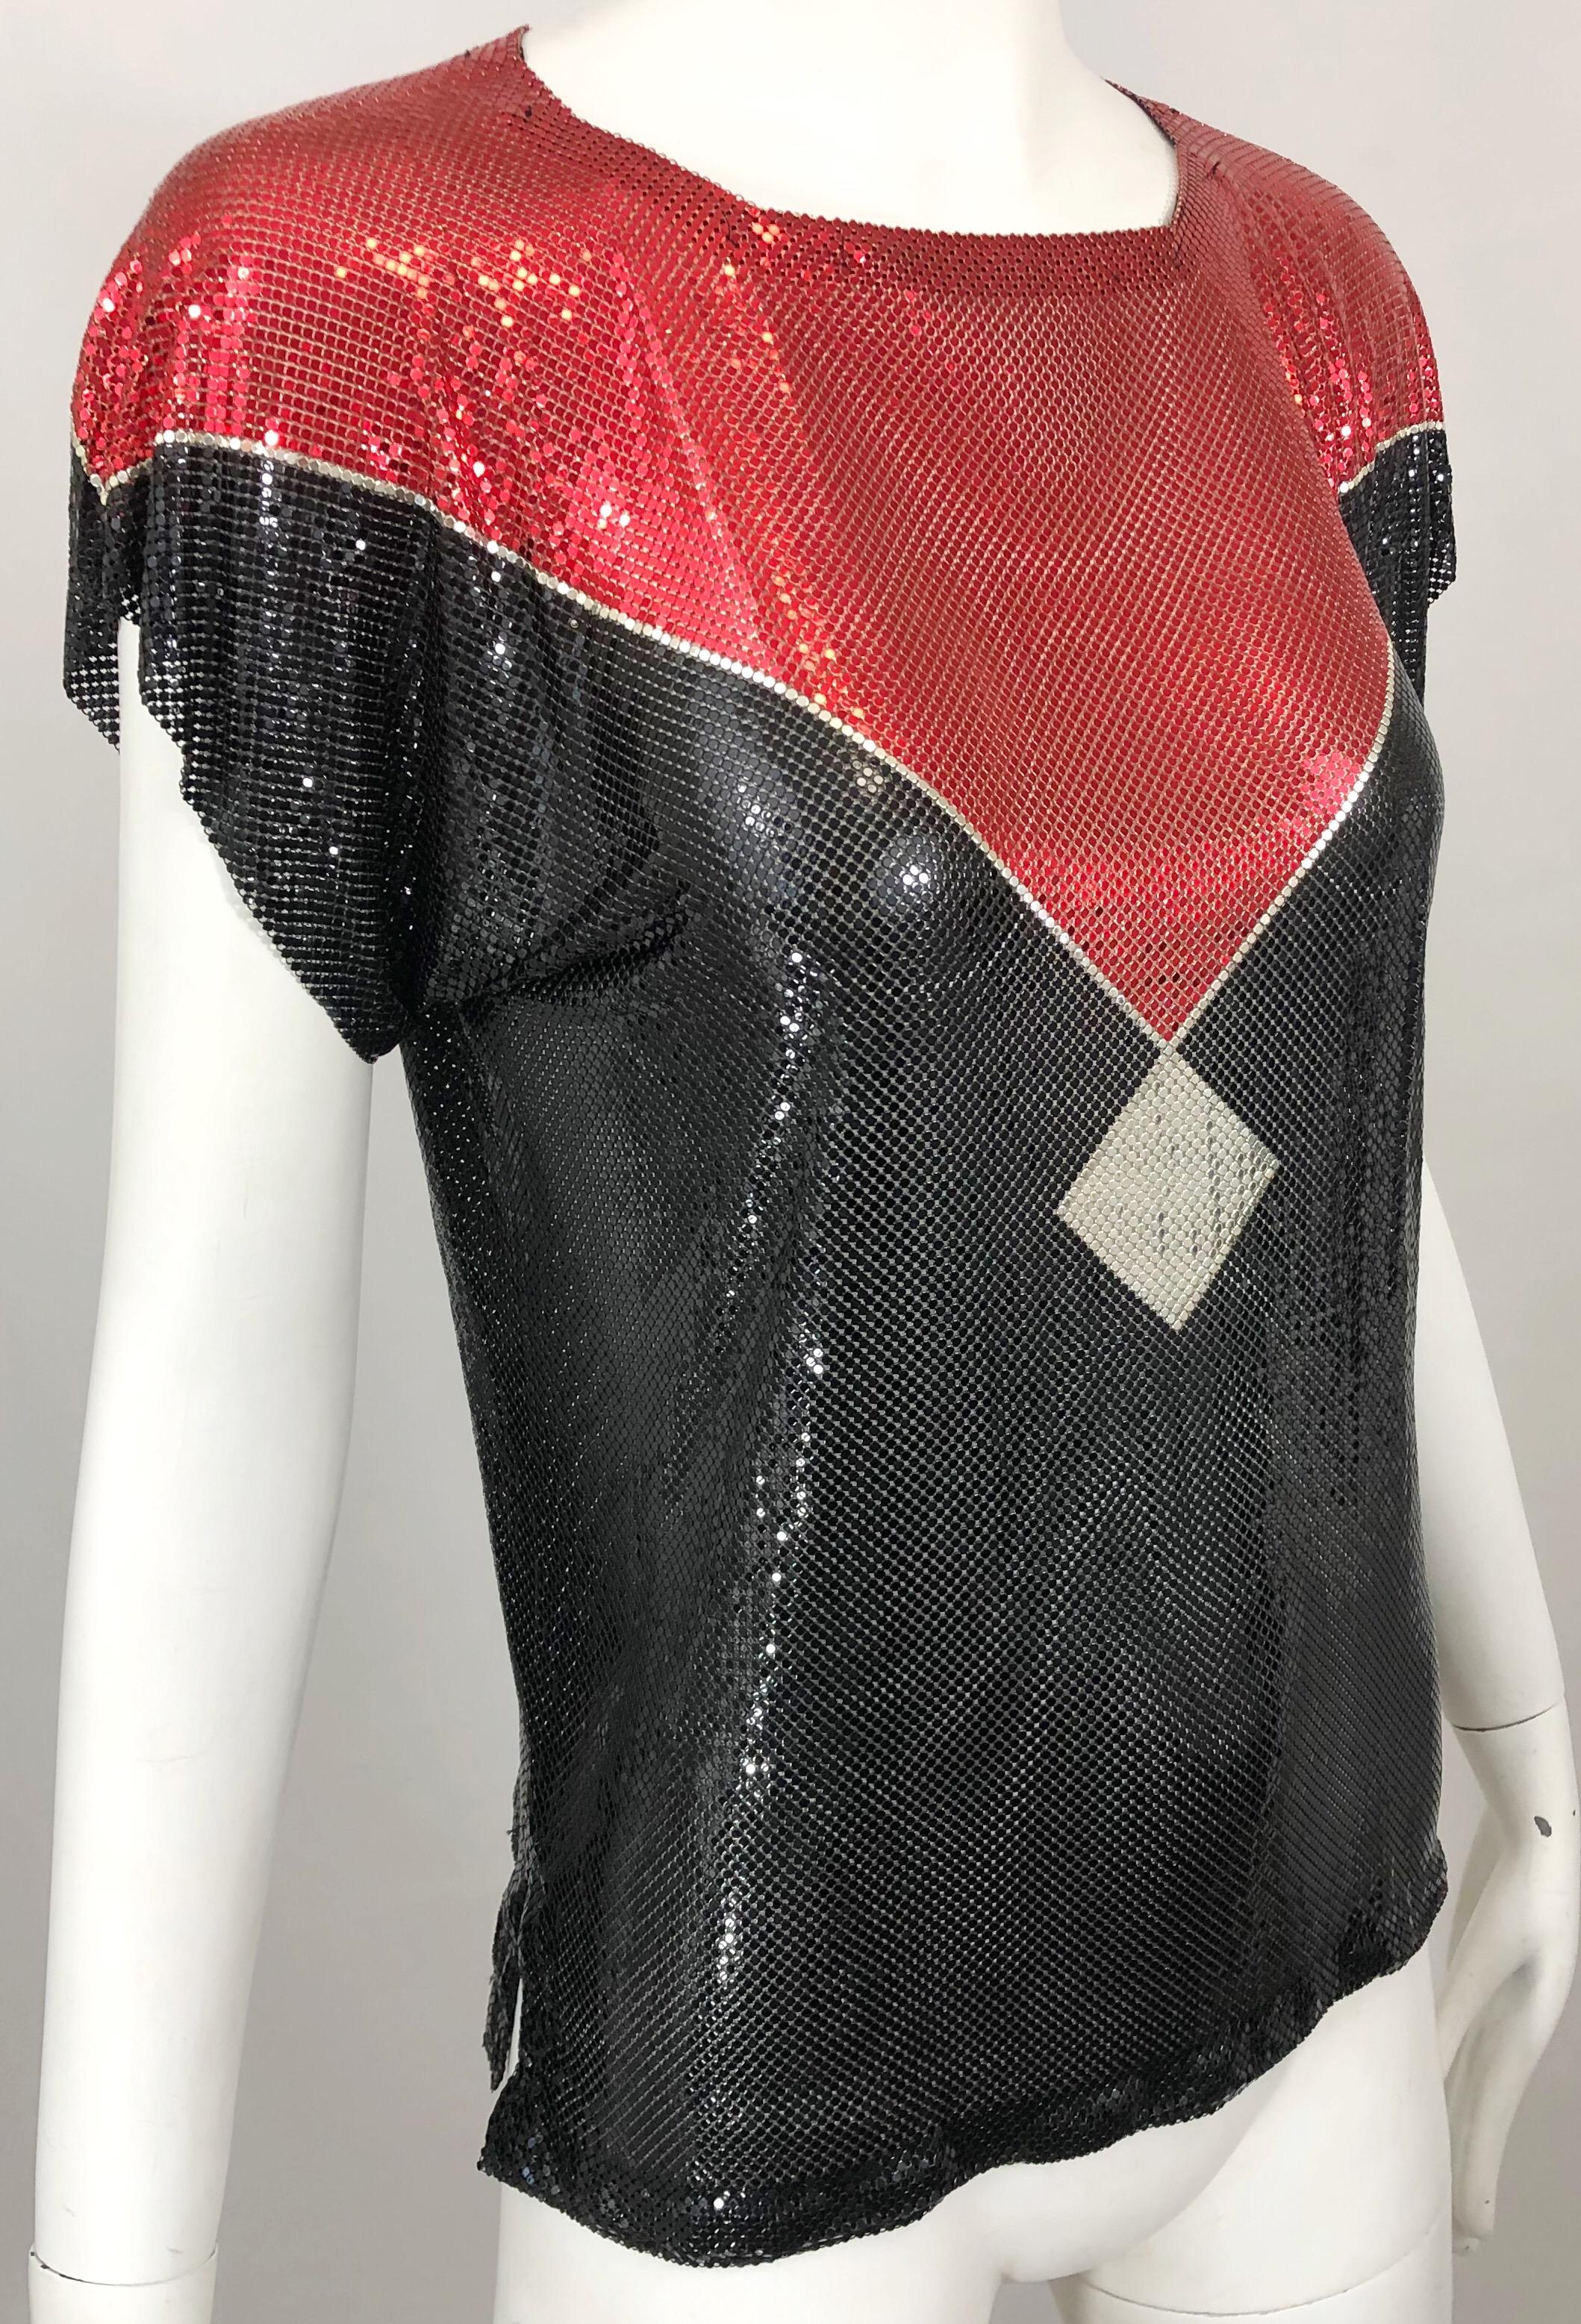 Women's Avant Garde 1970s Whiting & Davis Red + Black + Silver Chainmail Metal Mesh Top For Sale